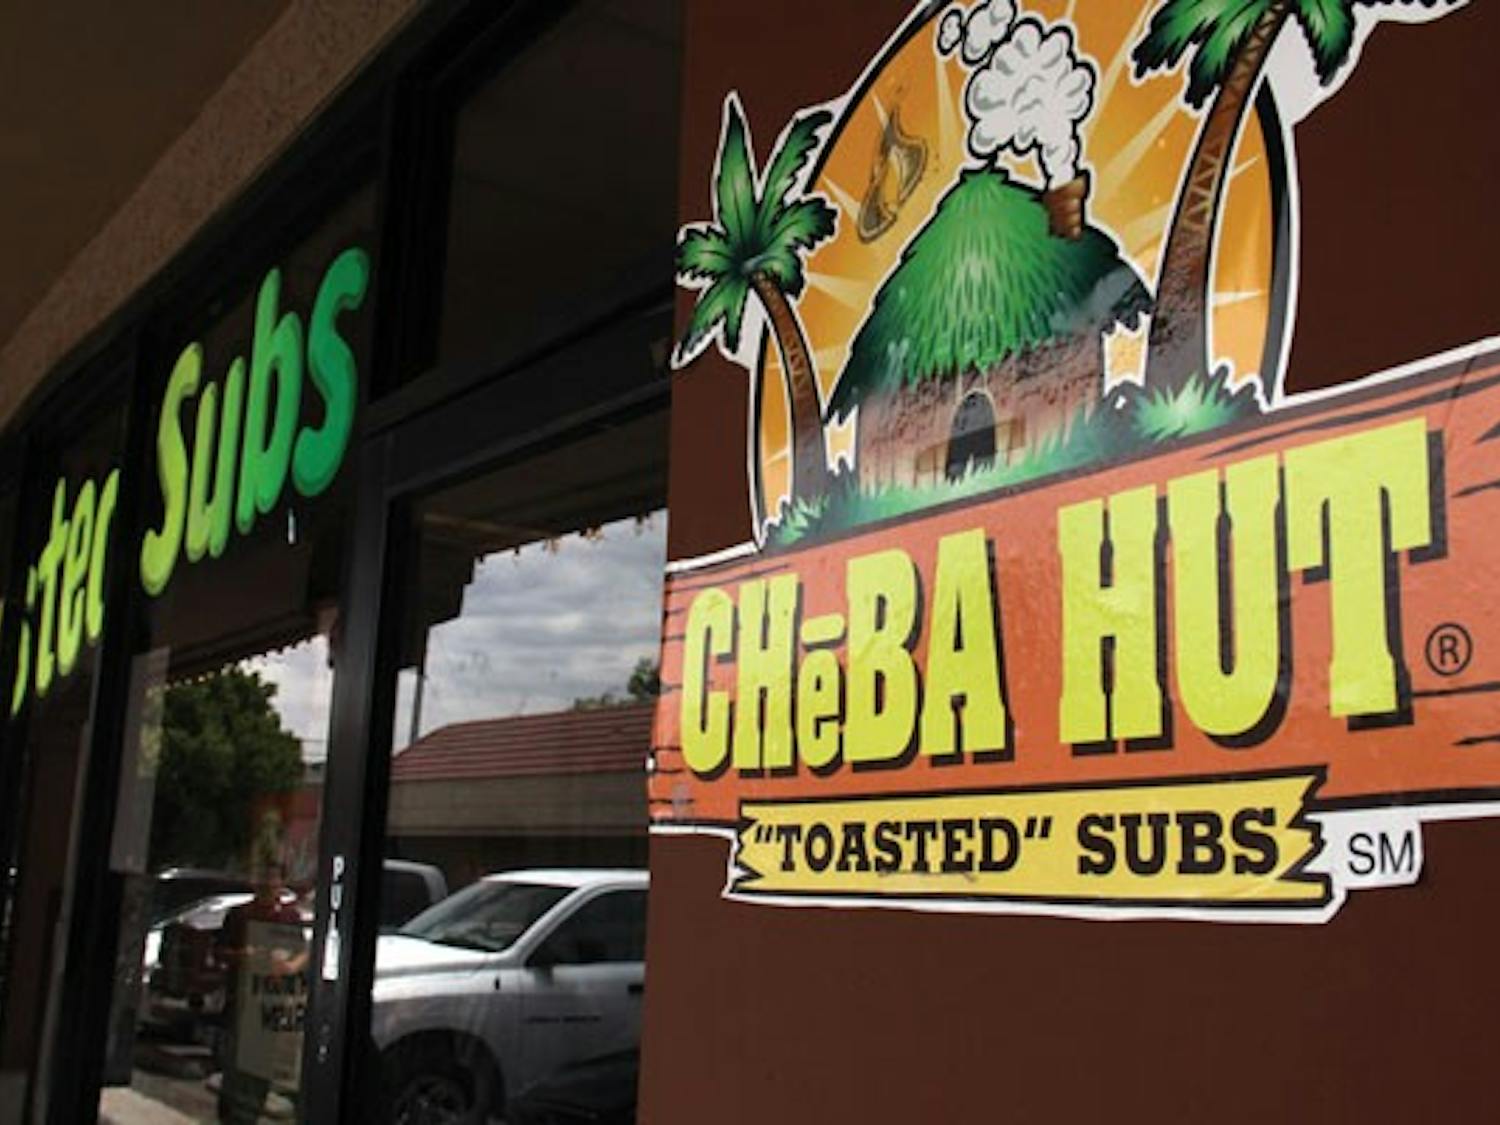 Tempe's Cheba Hut "Toasted" Subs off of University Drive applied for a liquor license and is curently waiting approval from the City of Tempe. (Photo by Shawn Raymundo)